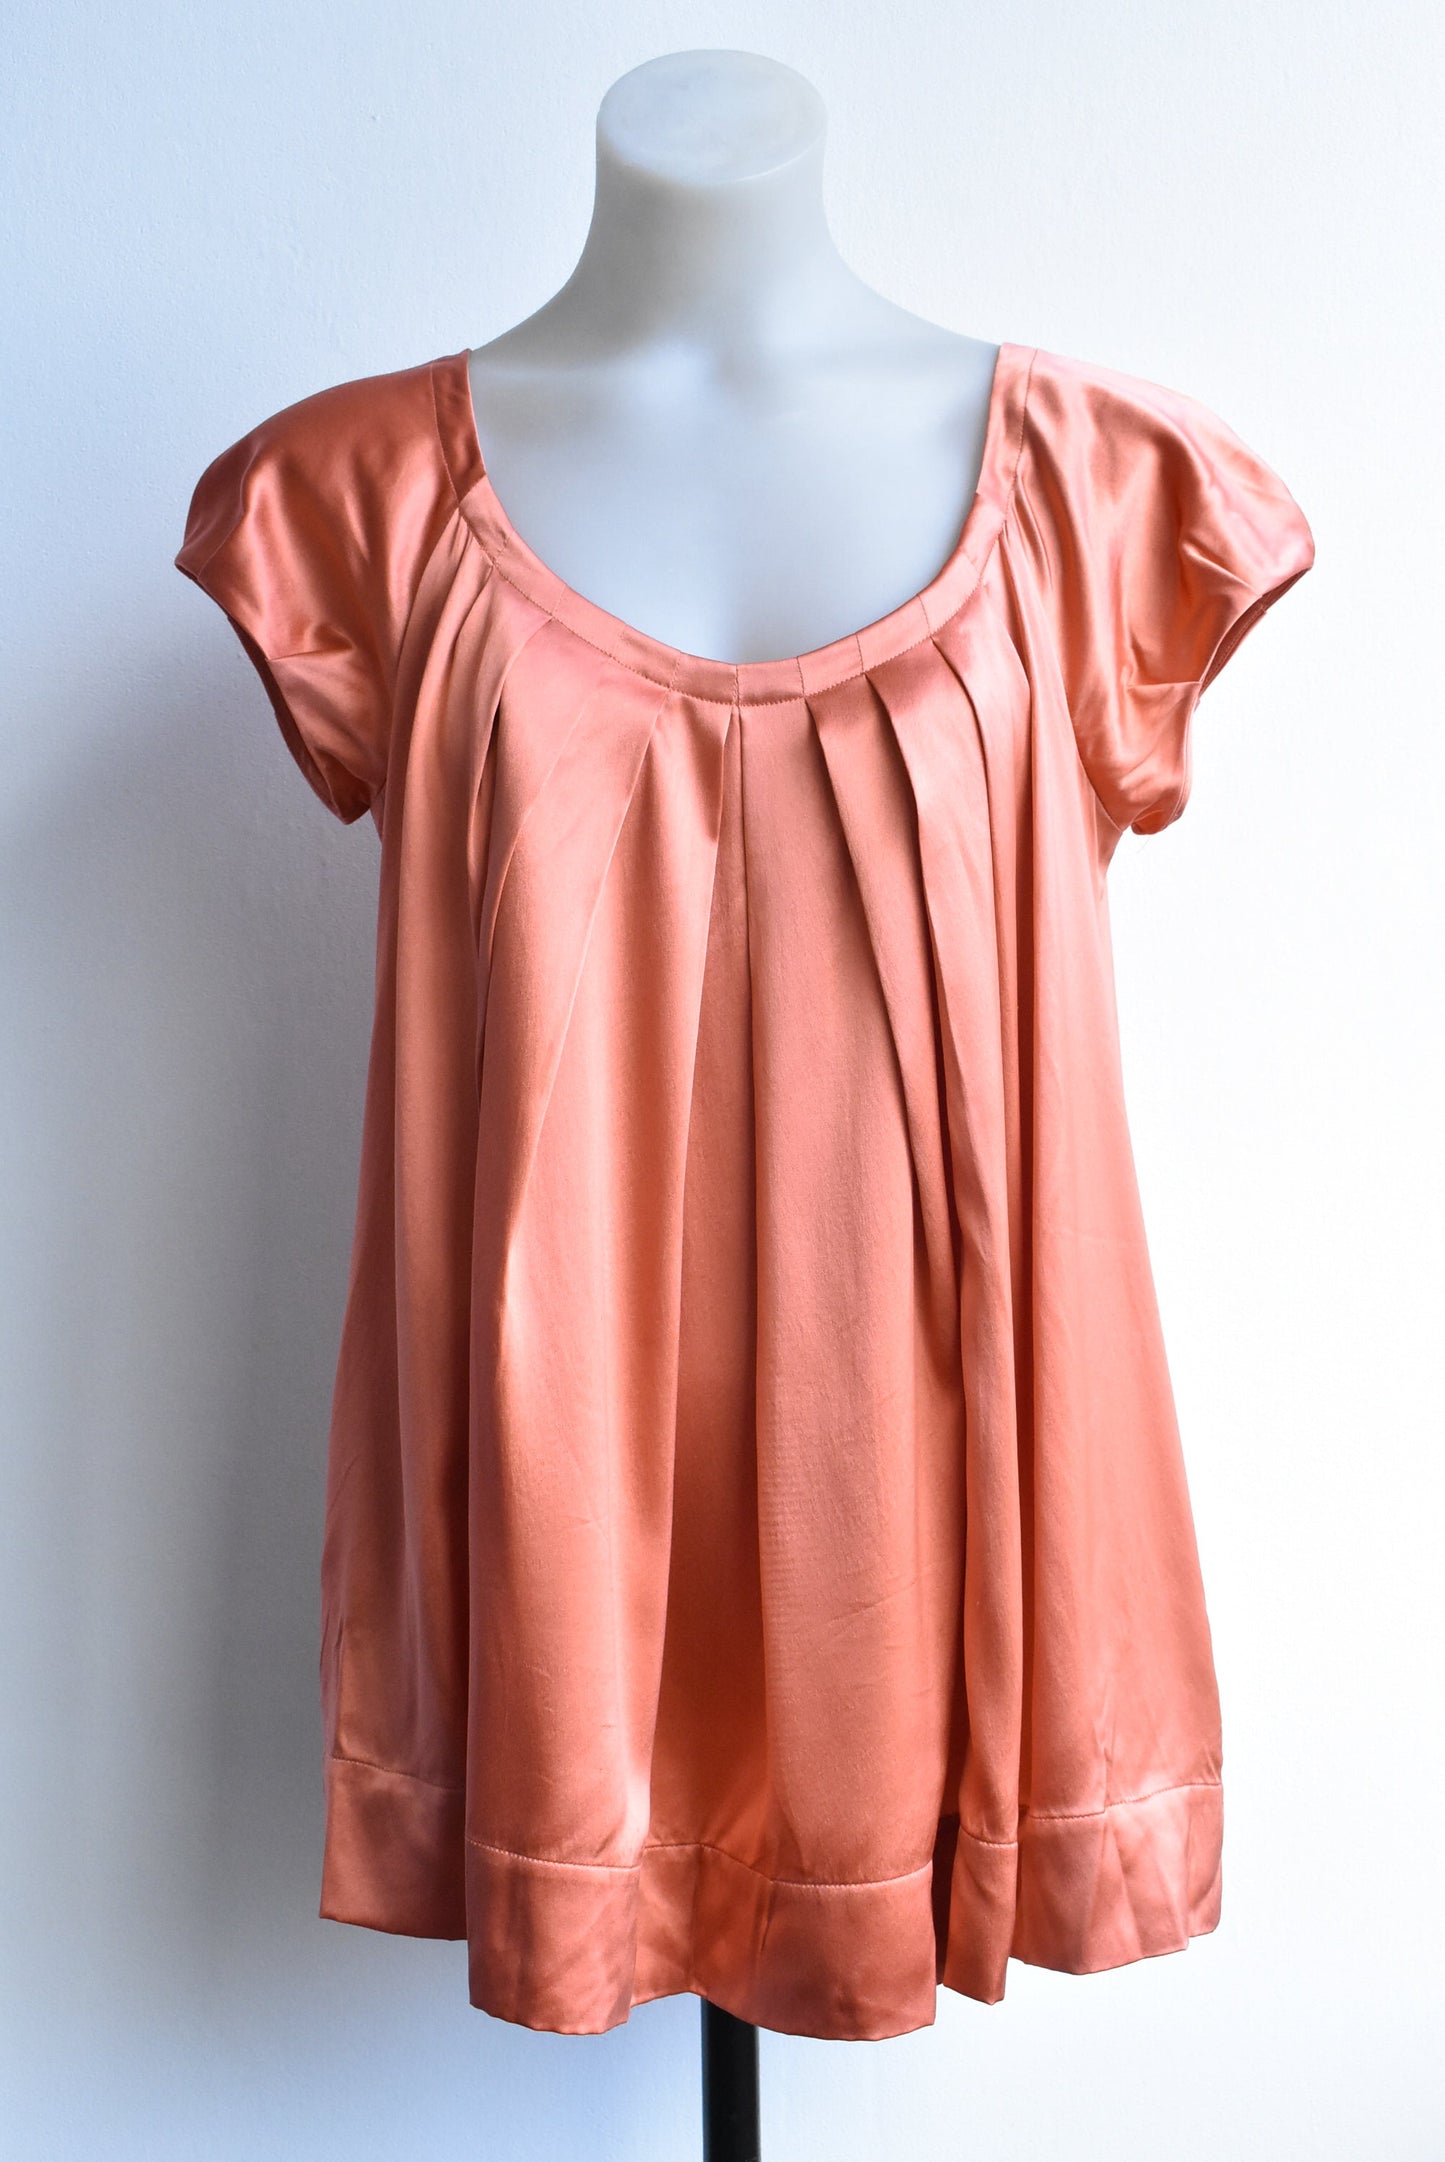 DKNY silk-blend orange pleated top with pockets, size 8